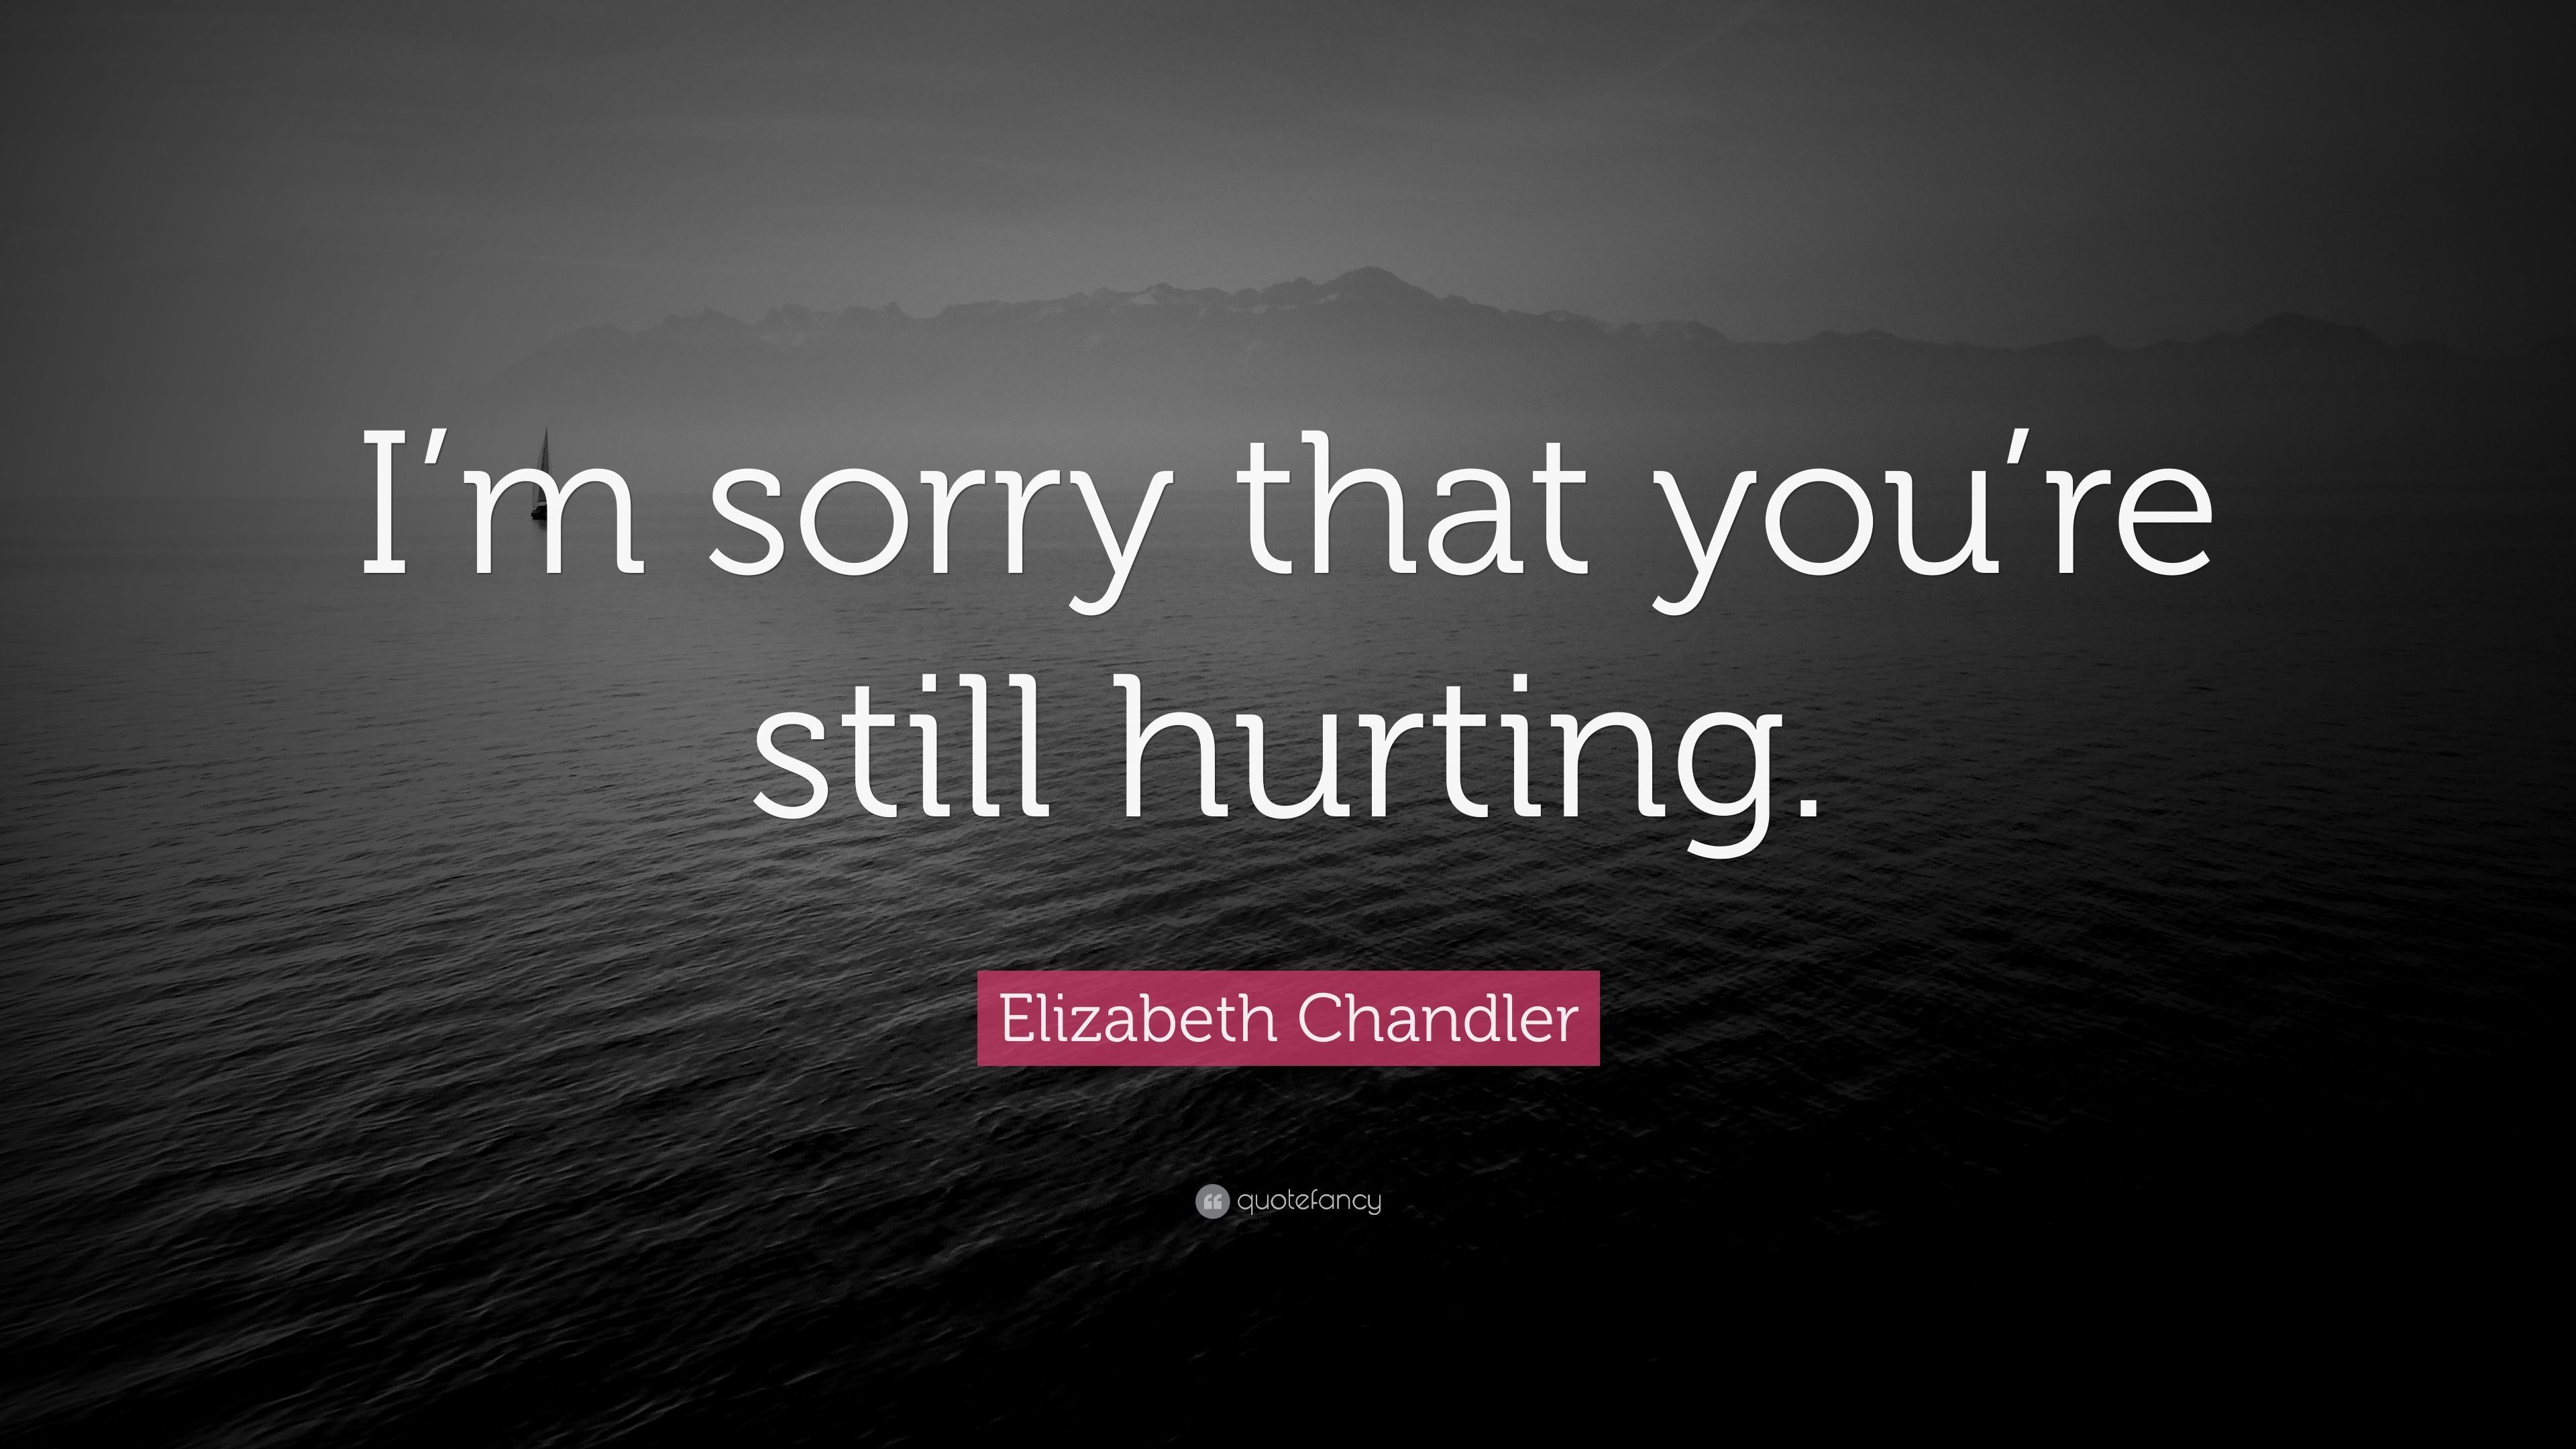 Elizabeth Chandler Quote: “I'm sorry that you're still hurting